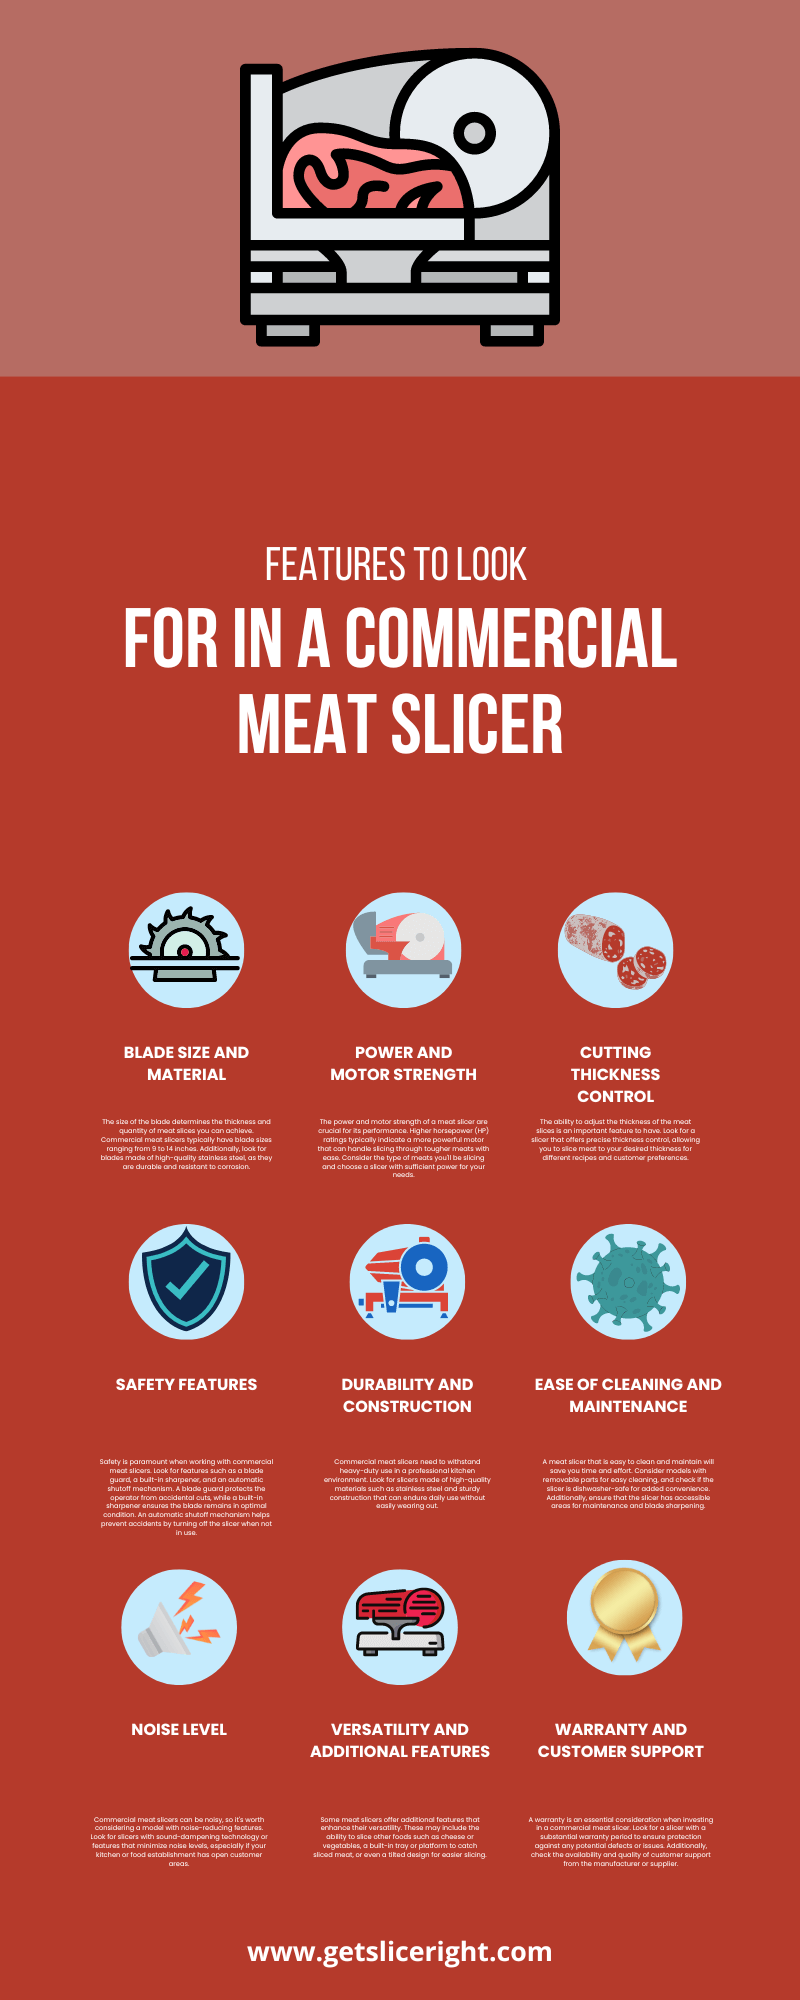 Features to look for in a commercial meat slicer